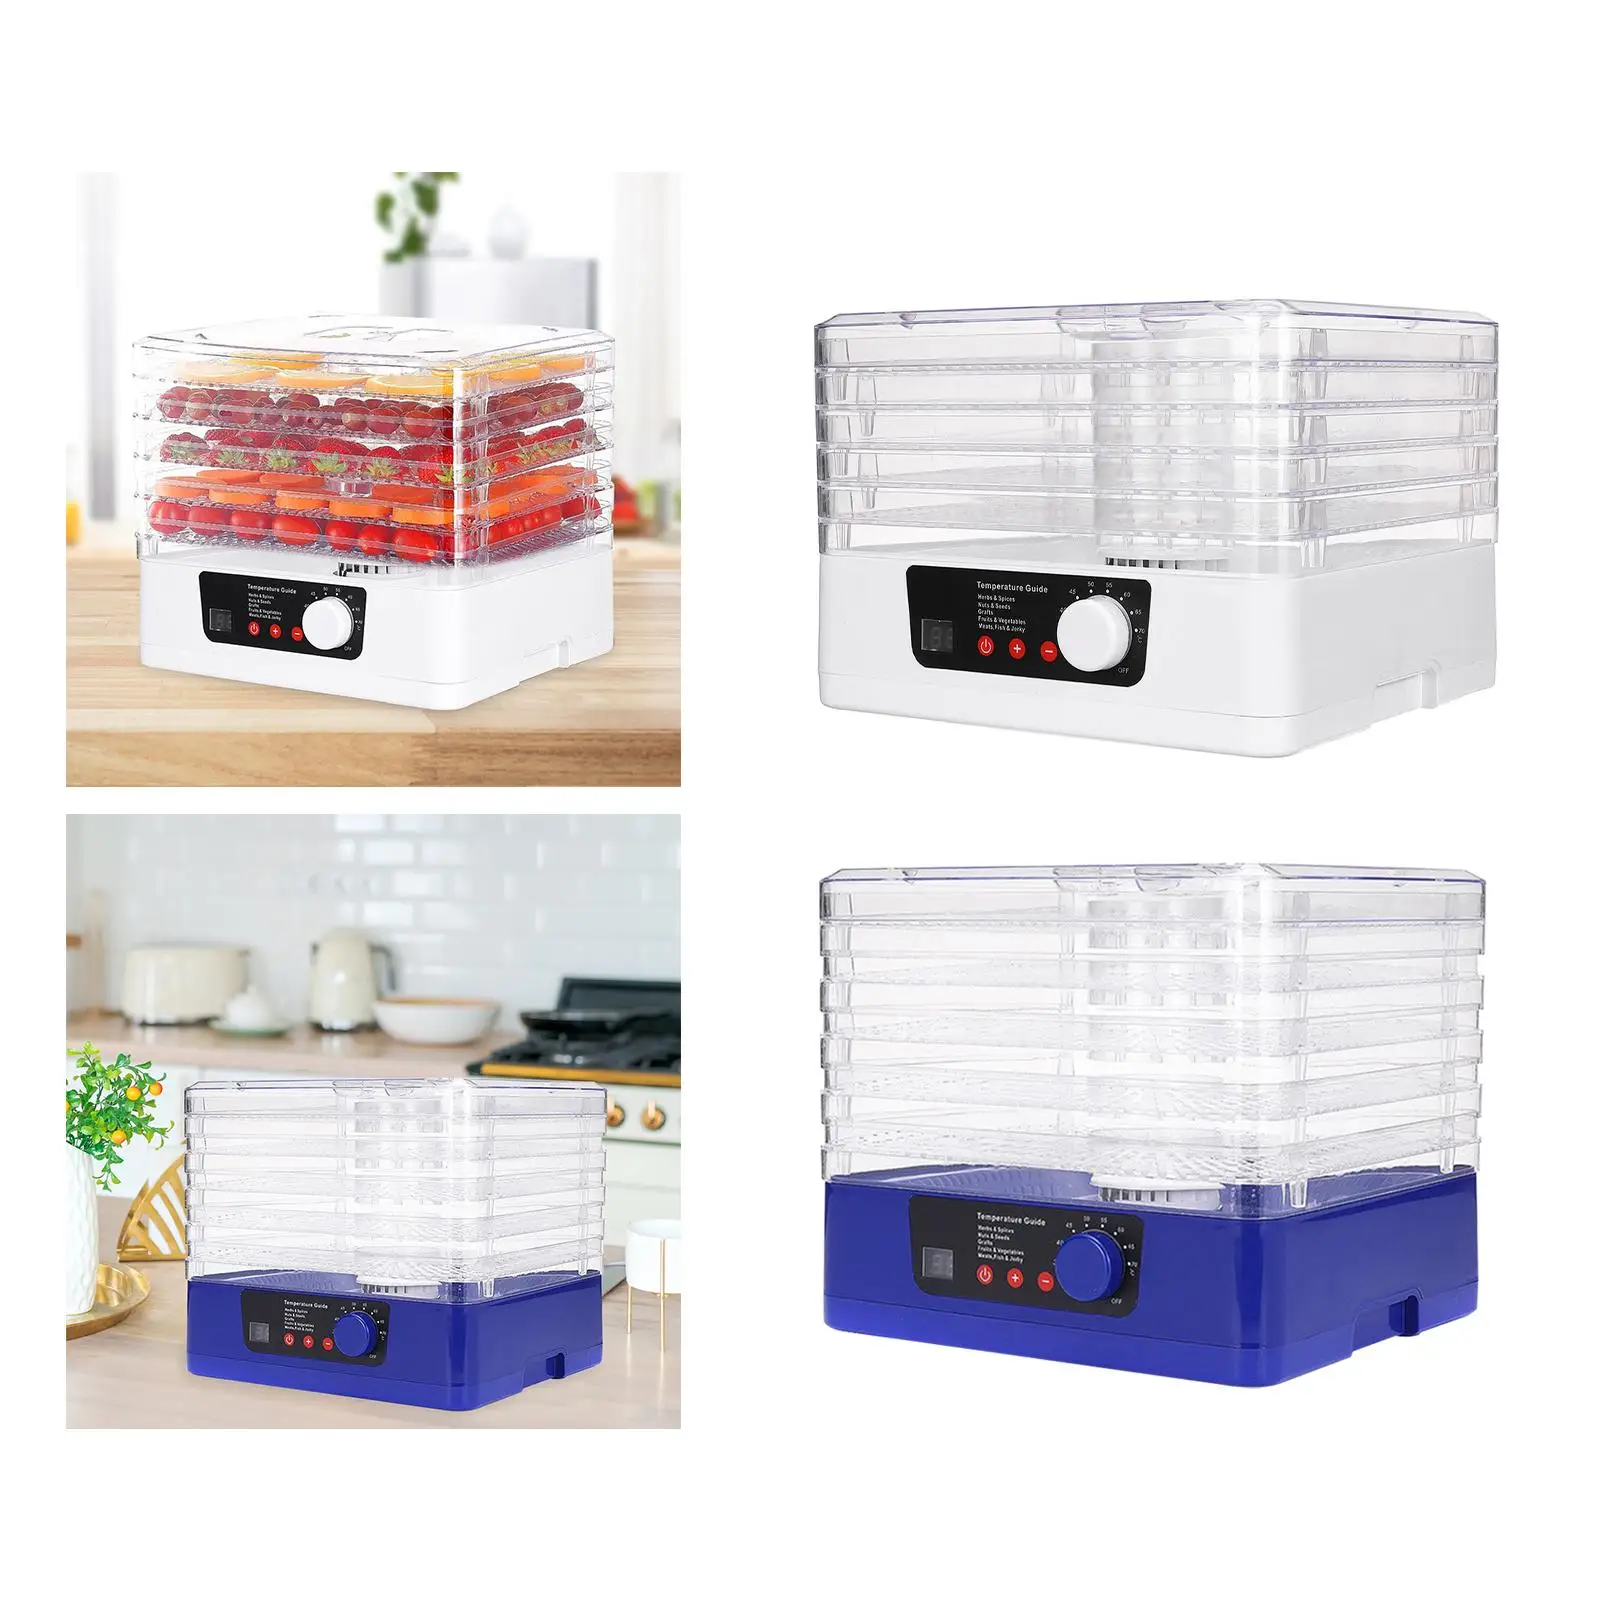 Food Fruit Dryer Machine 5-layer Large 350W Temperature Control Durable Mute Portable Dehydration Reusable Fruit Dryer for Meats